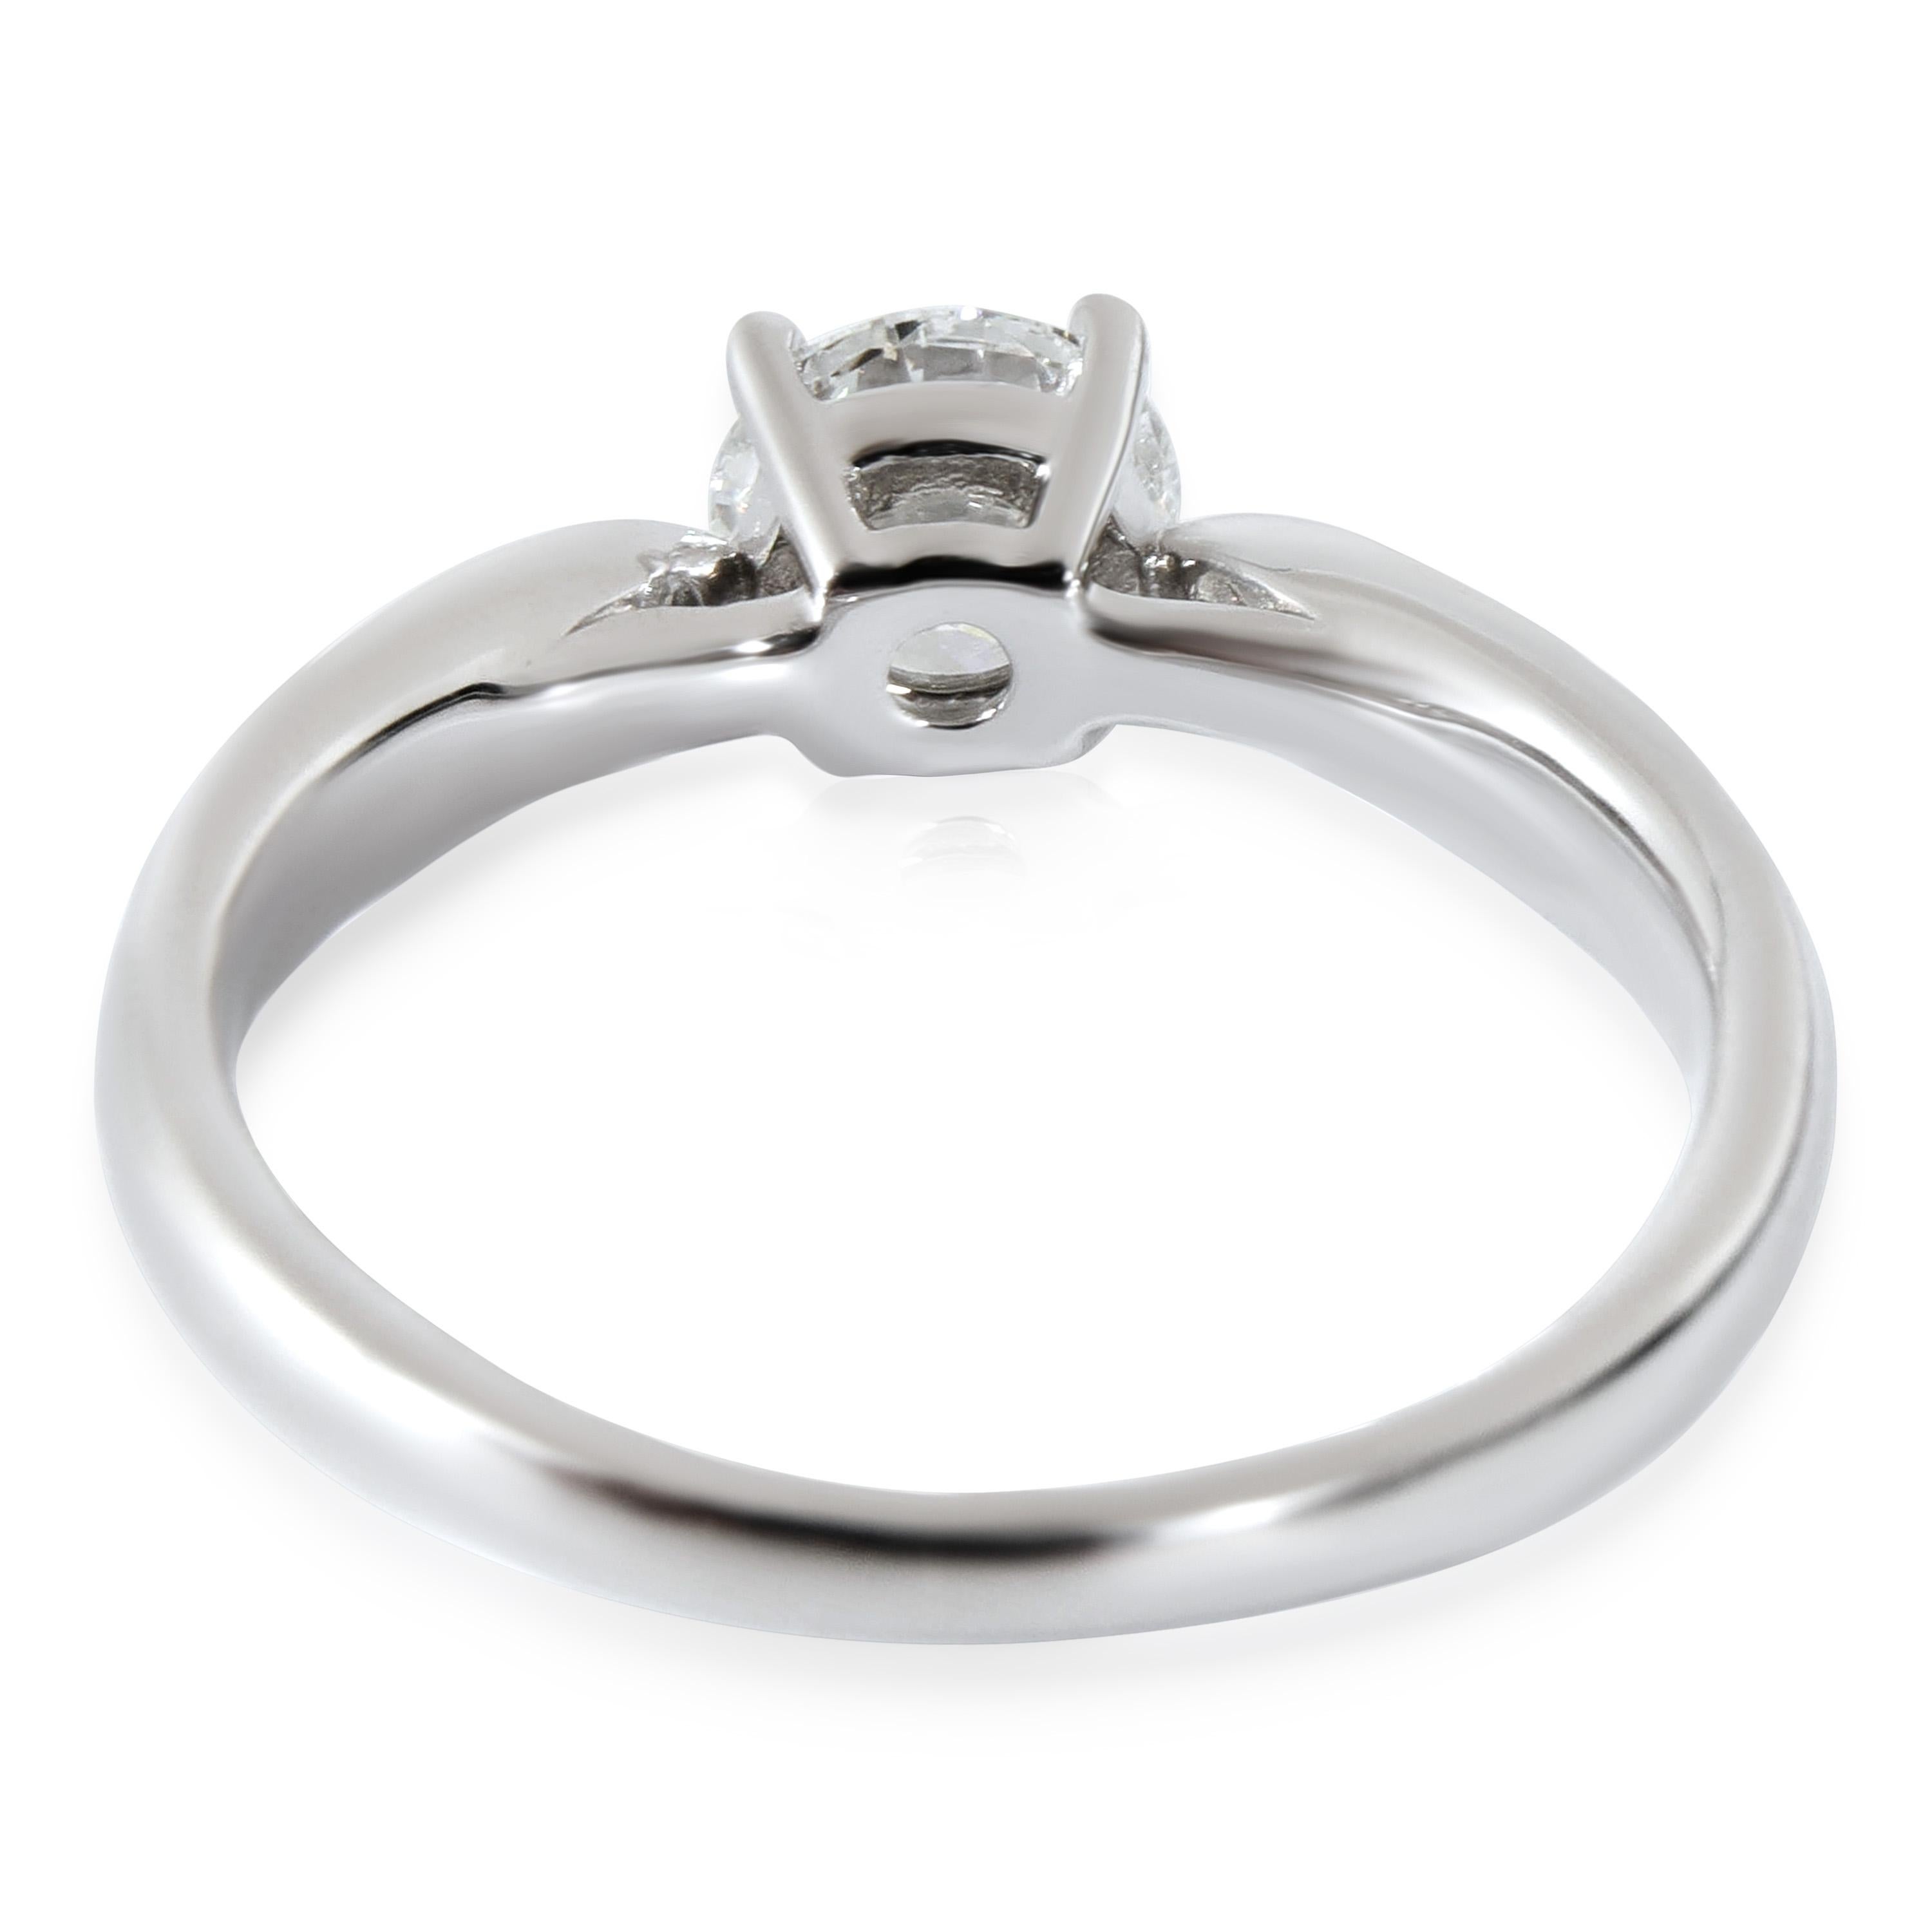 Tiffany & Co. Harmony Engagement Ring in  Platinum F VVS2 0.57 CTW

PRIMARY DETAILS
SKU: 132422
Listing Title: Tiffany & Co. Harmony Engagement Ring in  Platinum F VVS2 0.57 CTW
Condition Description: A study in harmony and balance. The Harmony